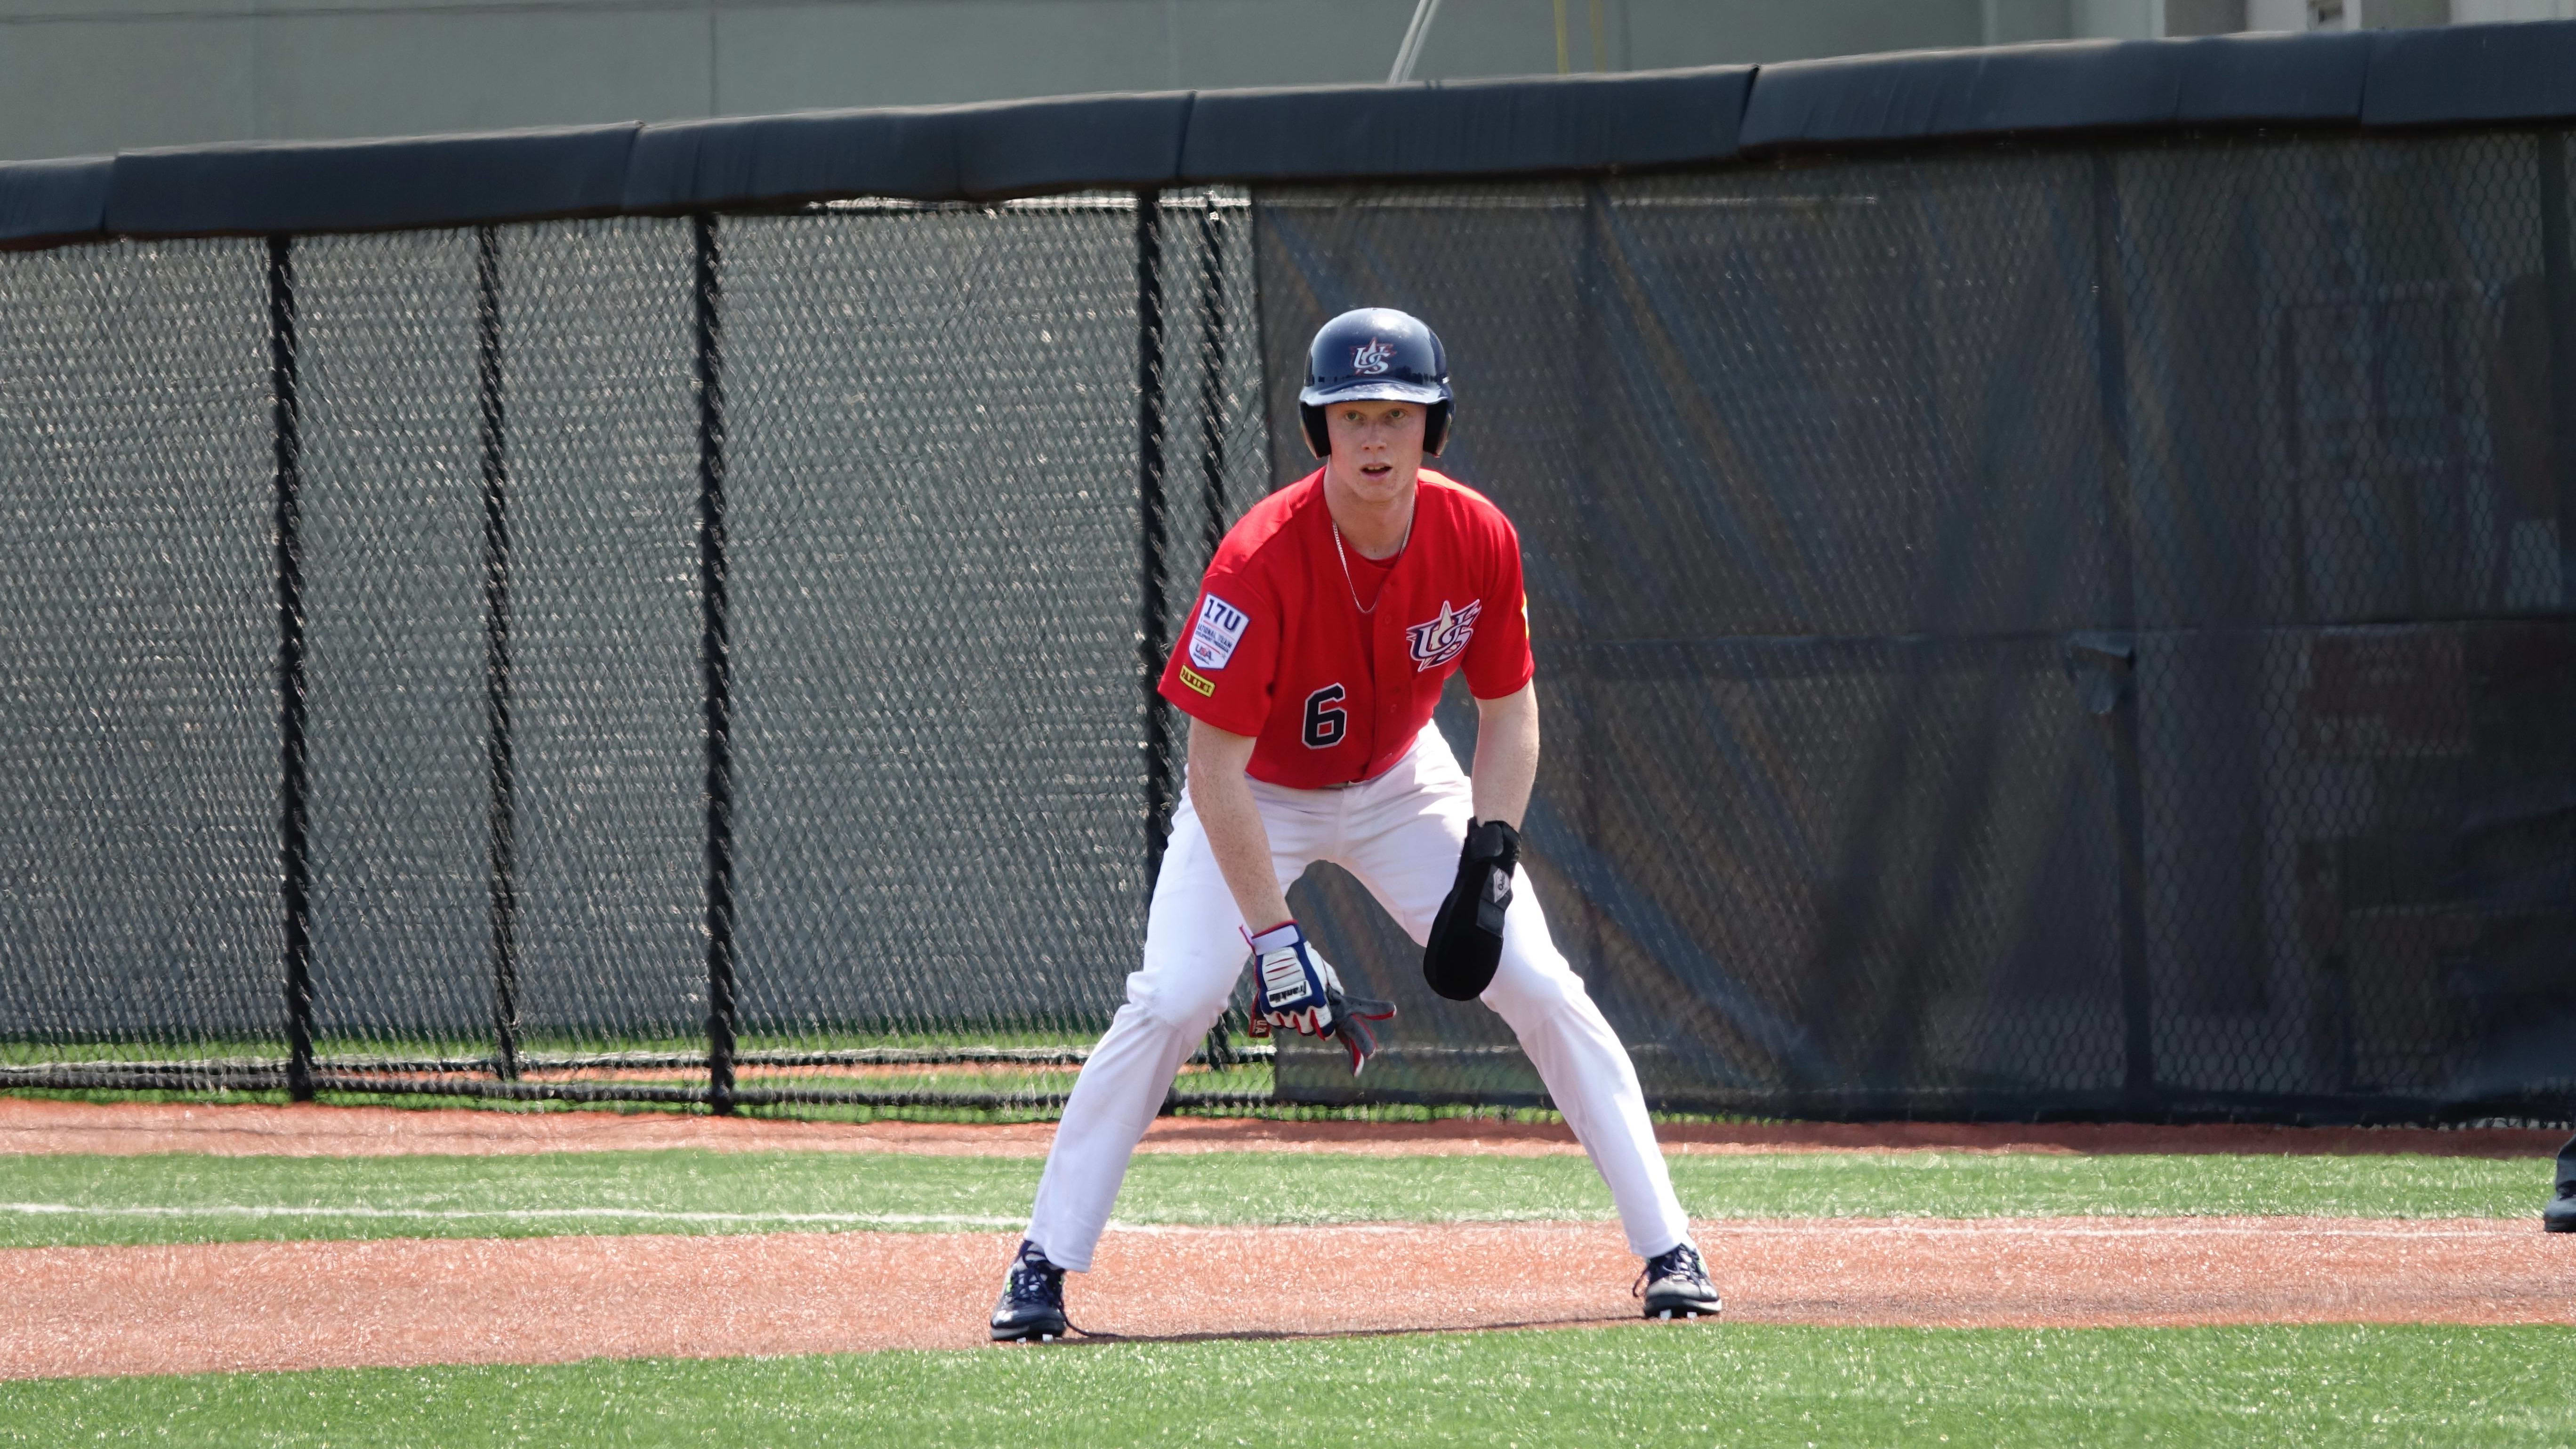 Now playing at The Diamond: one of baseball's elite prospects, Bowie catcher  Adley Rutschman